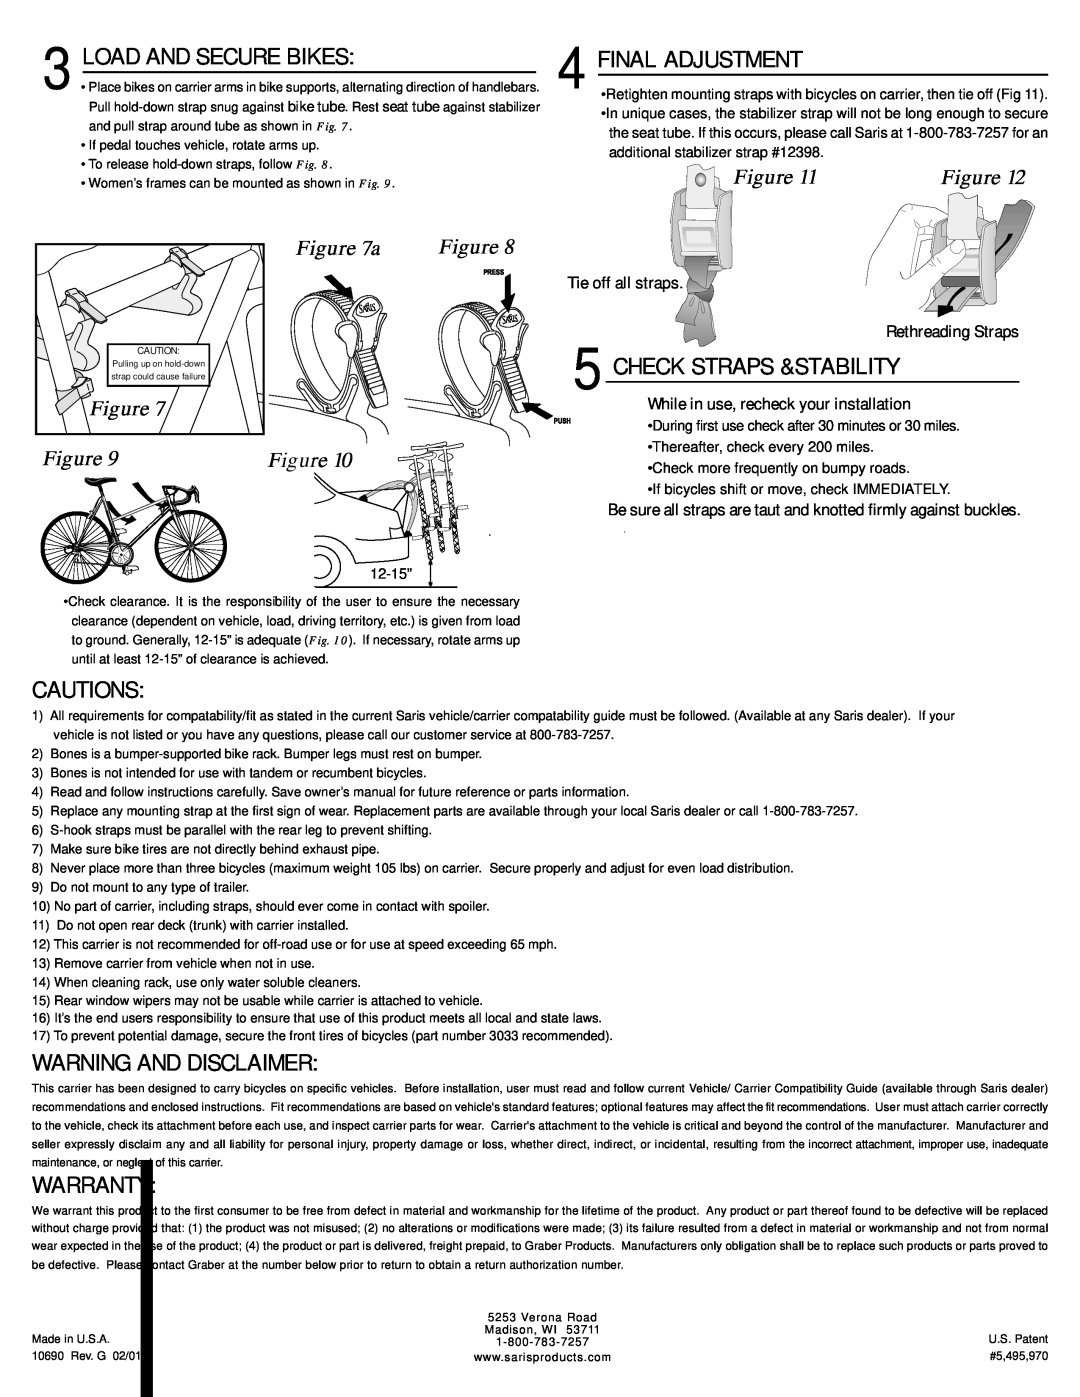 Saris 801 Load And Secure Bikes, Final Adjustment, Cautions, Check Straps &Stability, Warning And Disclaimer, Warranty 